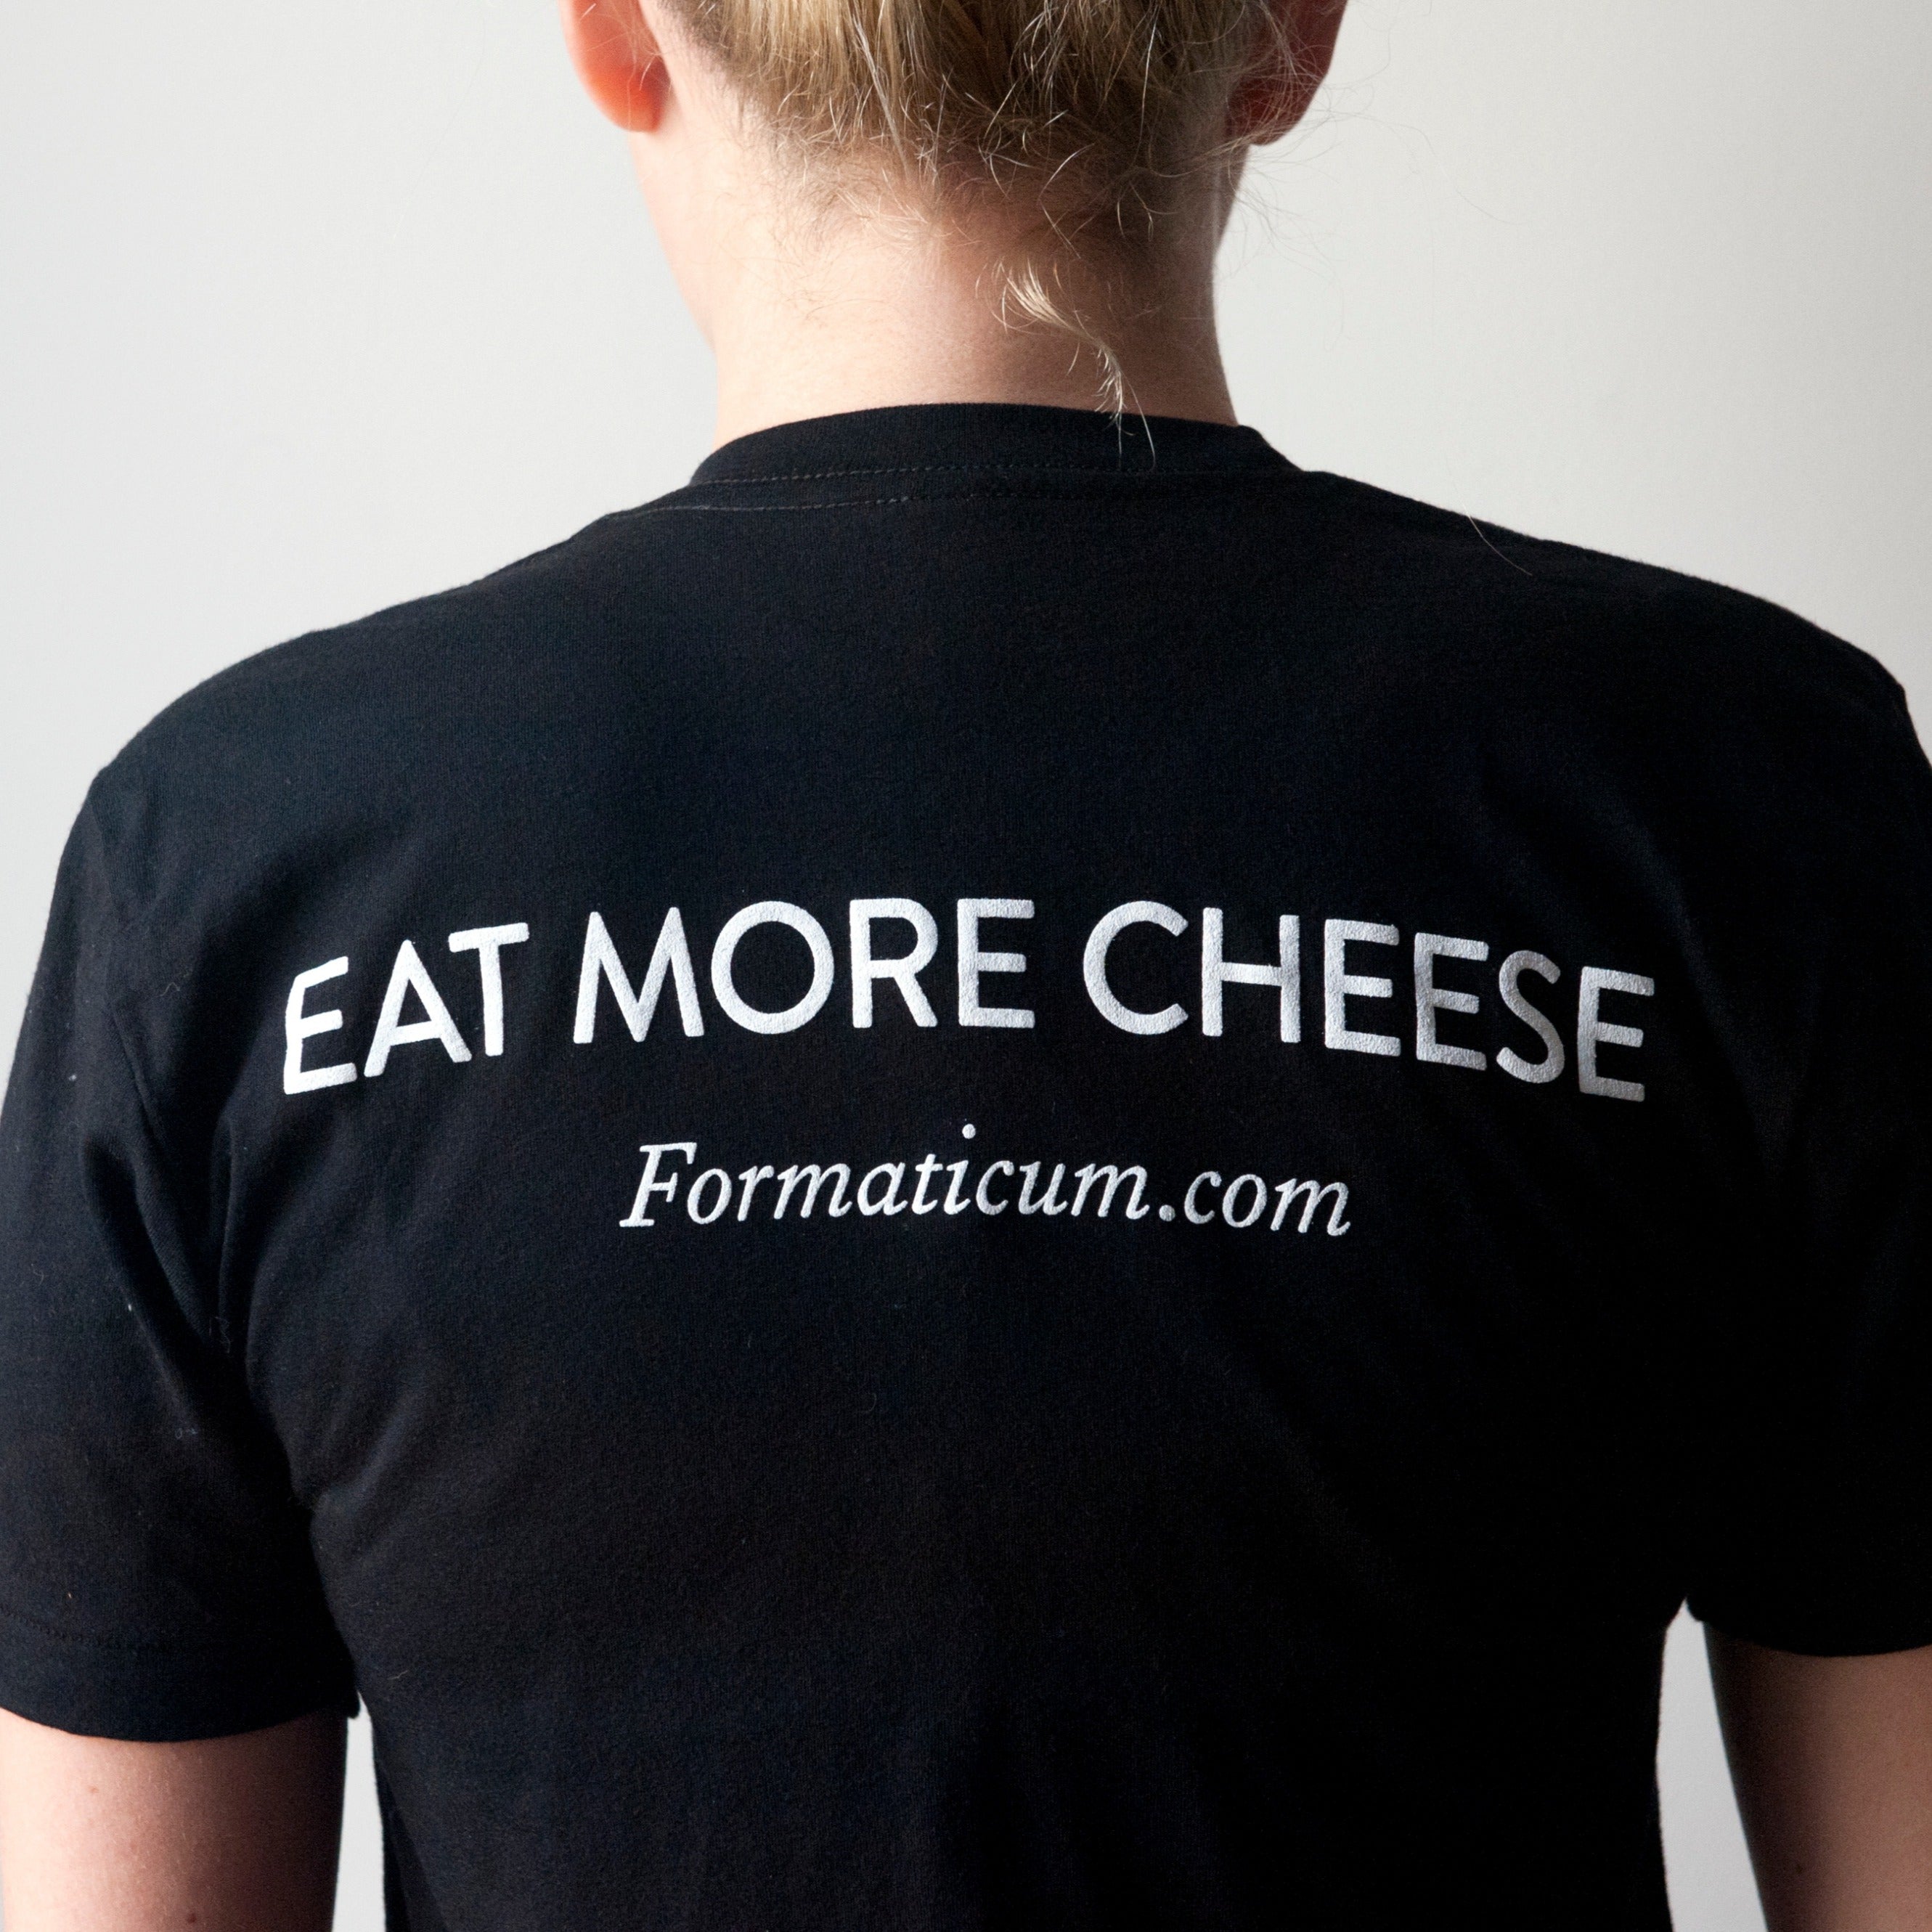 More Cheese" T Shirt – Formaticum